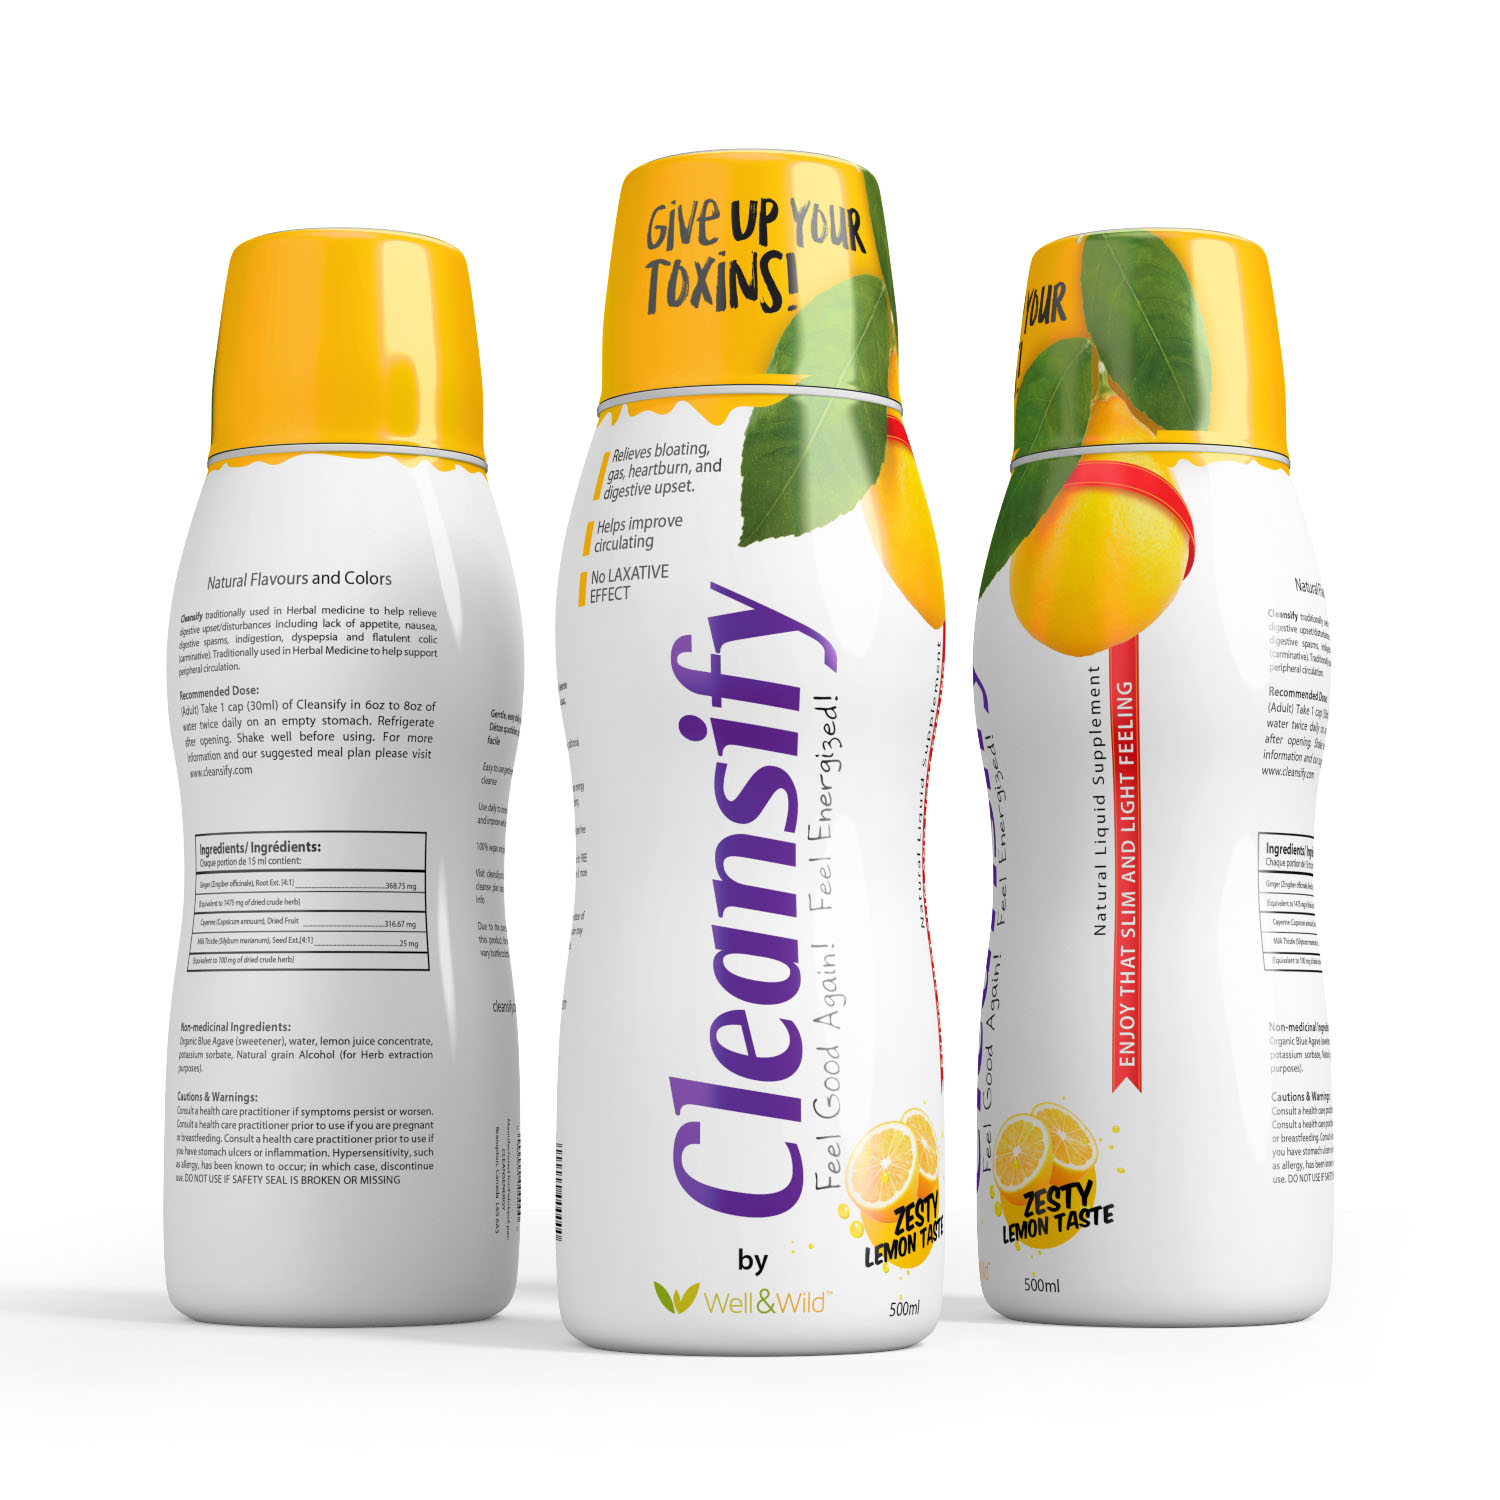 Cleansify Natural Liquid Cleanse & Vitality Drink . Receive the Cleansify E-Book Free!